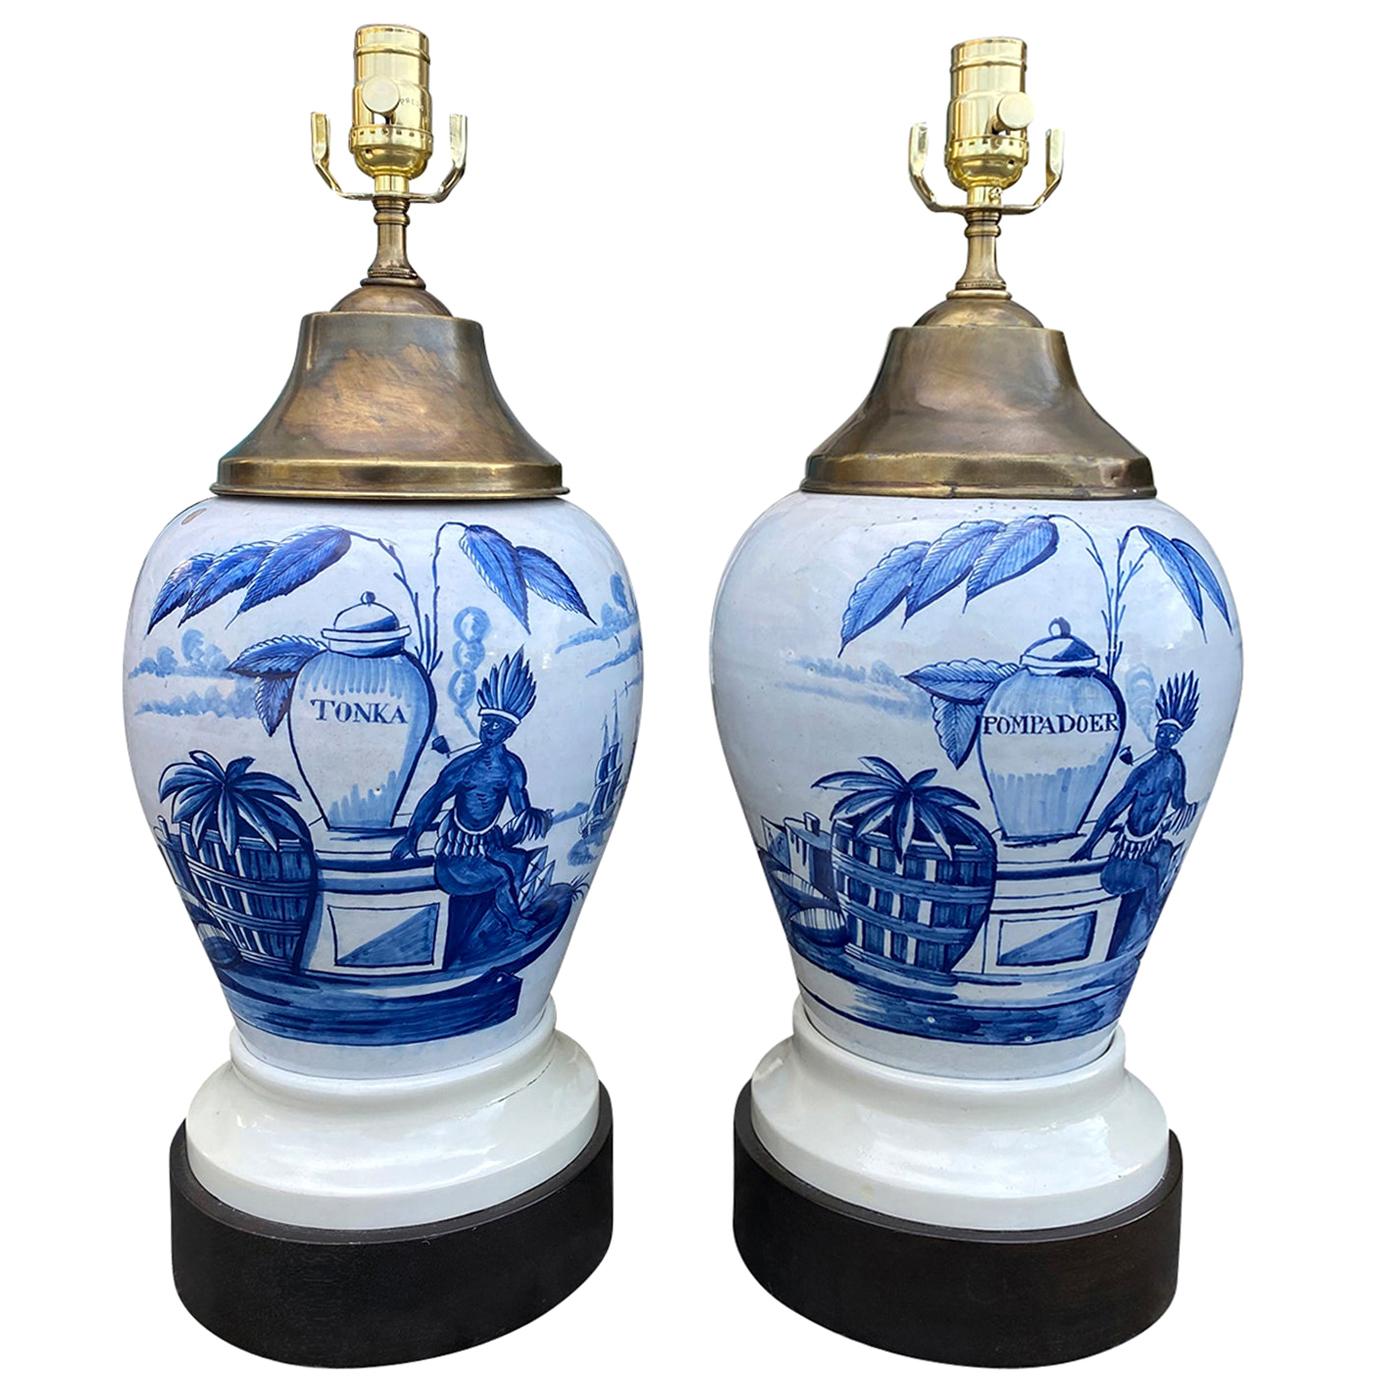 Pair of 18th Century Delft Tobacco Jars as Lamps